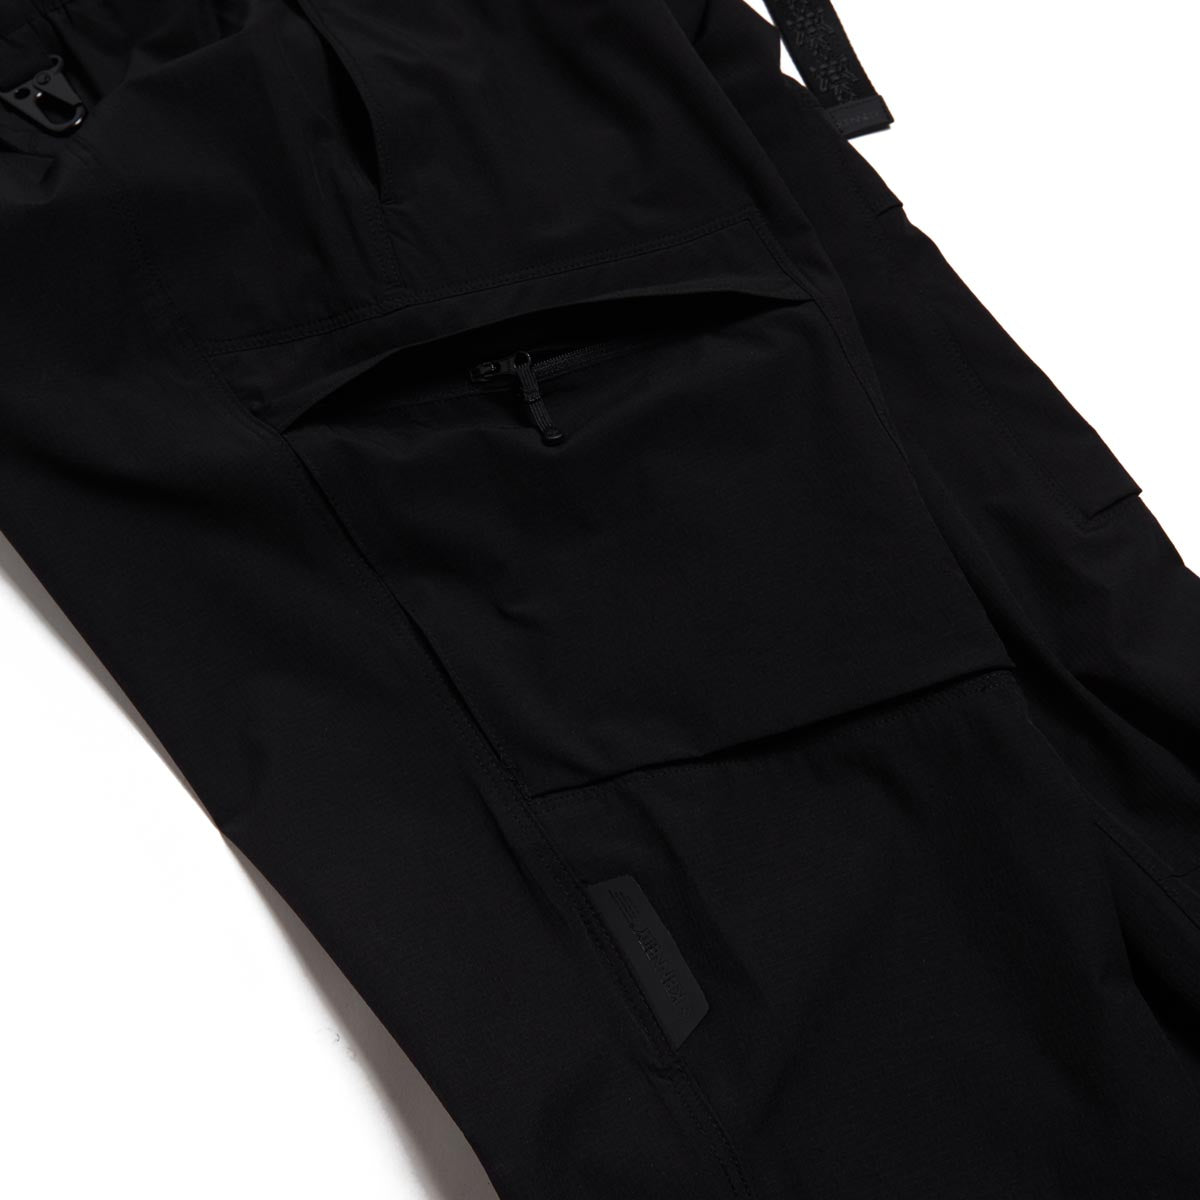 Kennedy The Ascension Cargo Pants - Black image 3